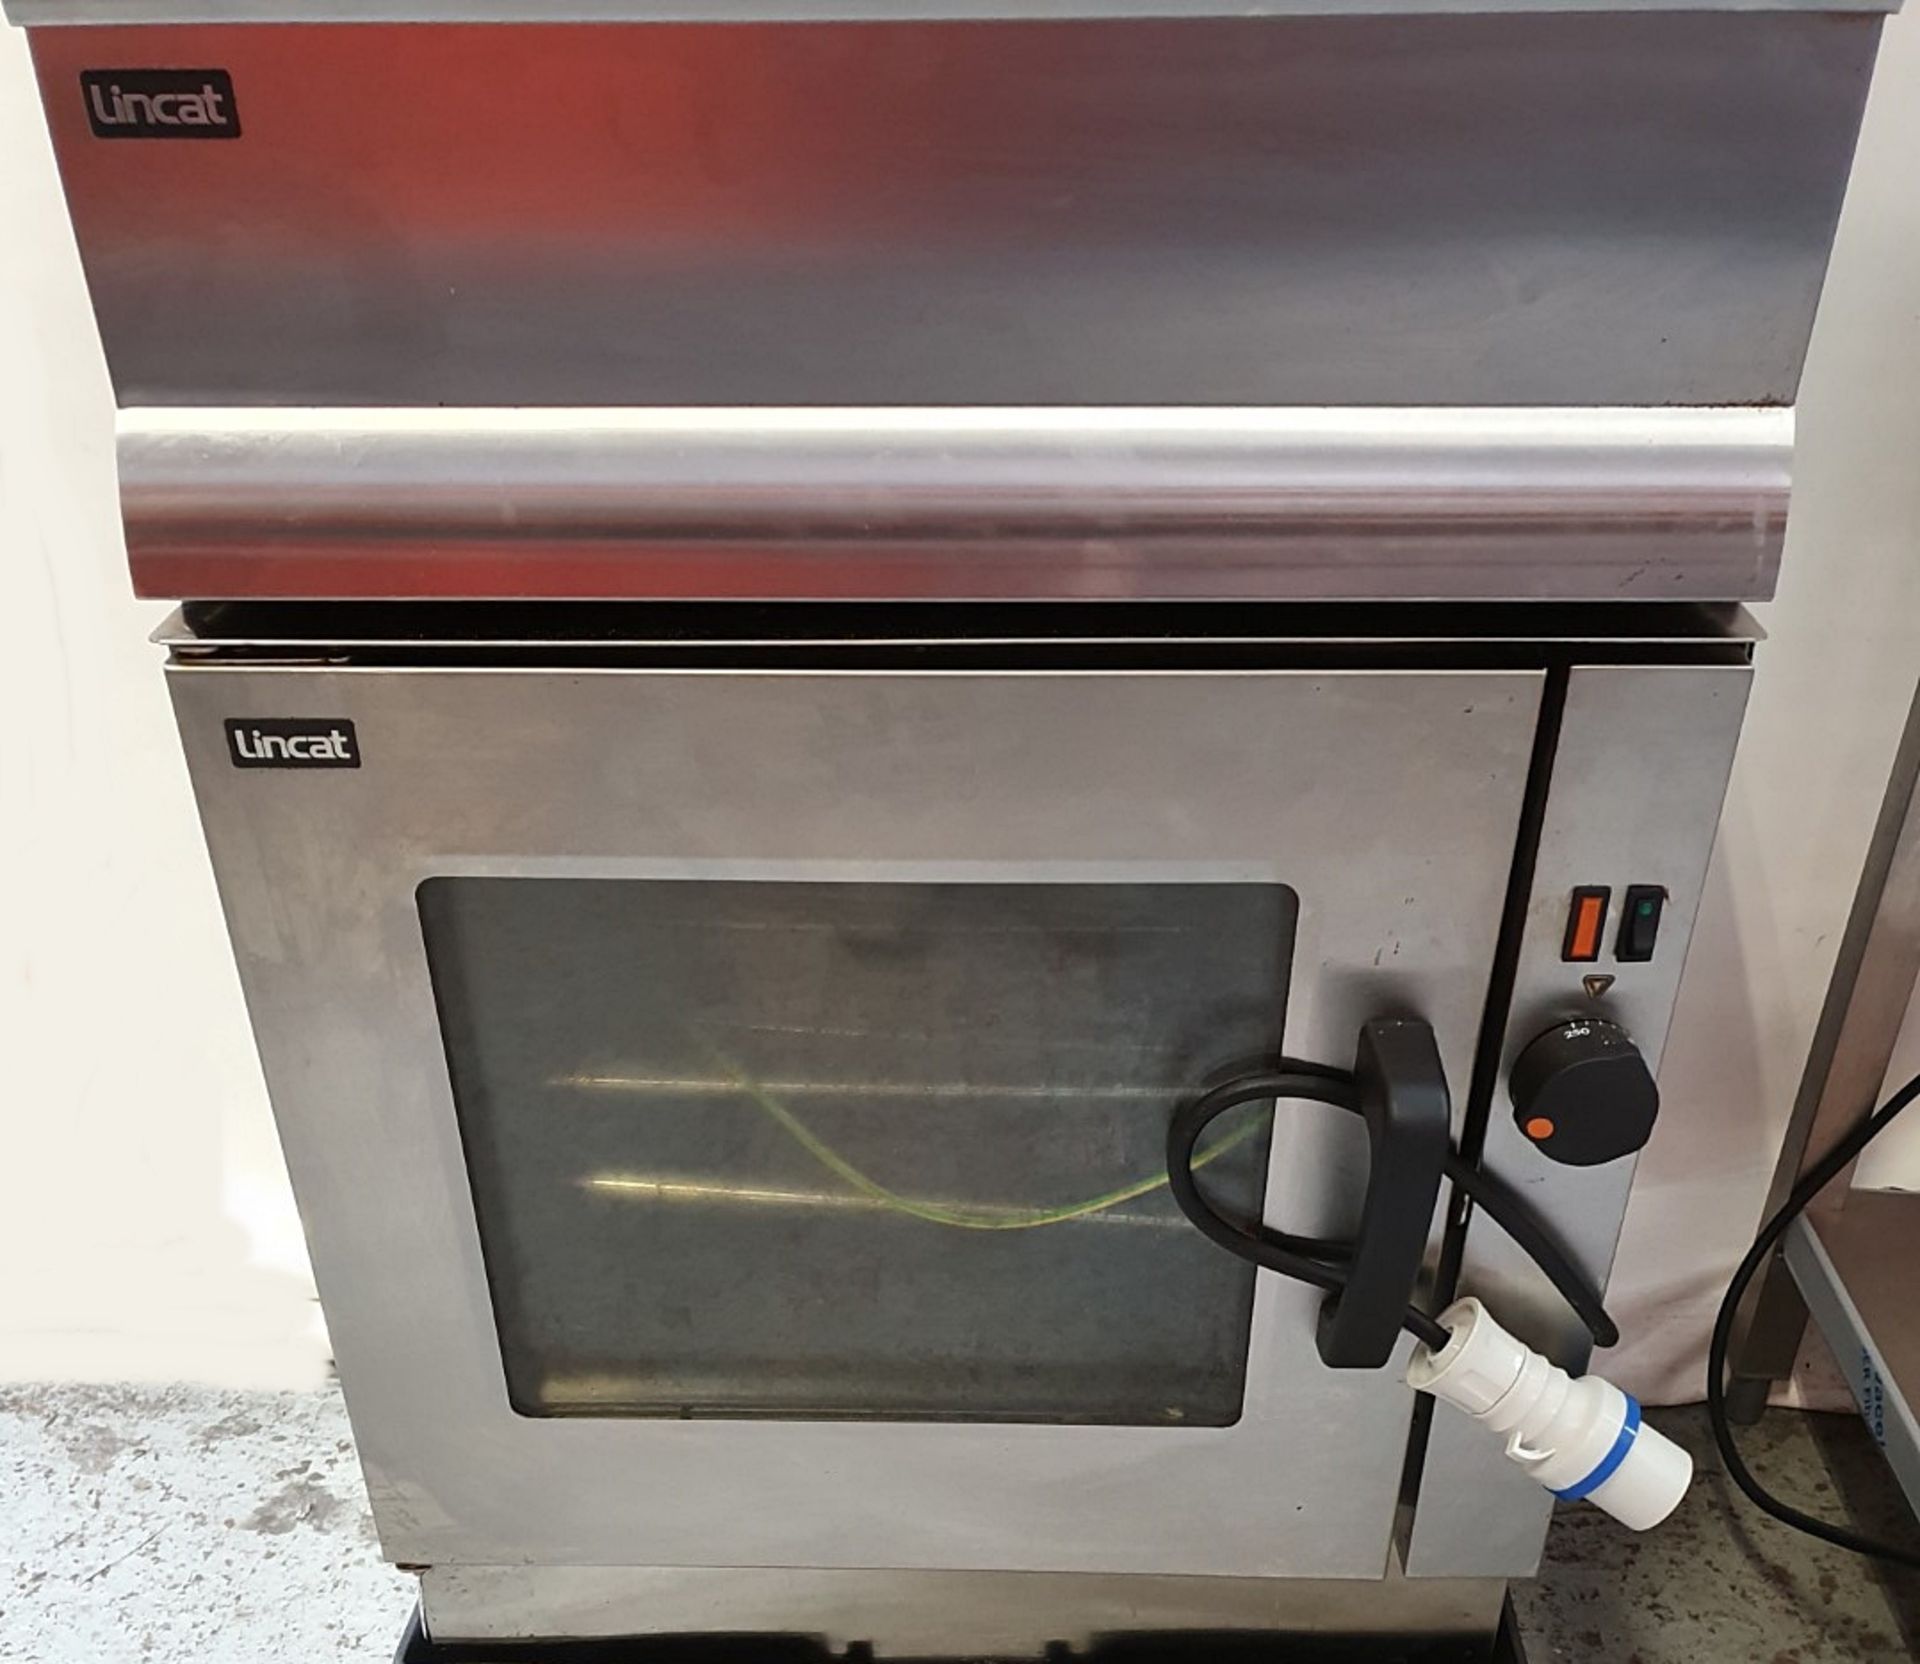 1 x Lincat Electric Fan Assisted Oven and Silverlink Worktop - Ref: BLT190 - CL449 - Location: WA14 - Image 2 of 15